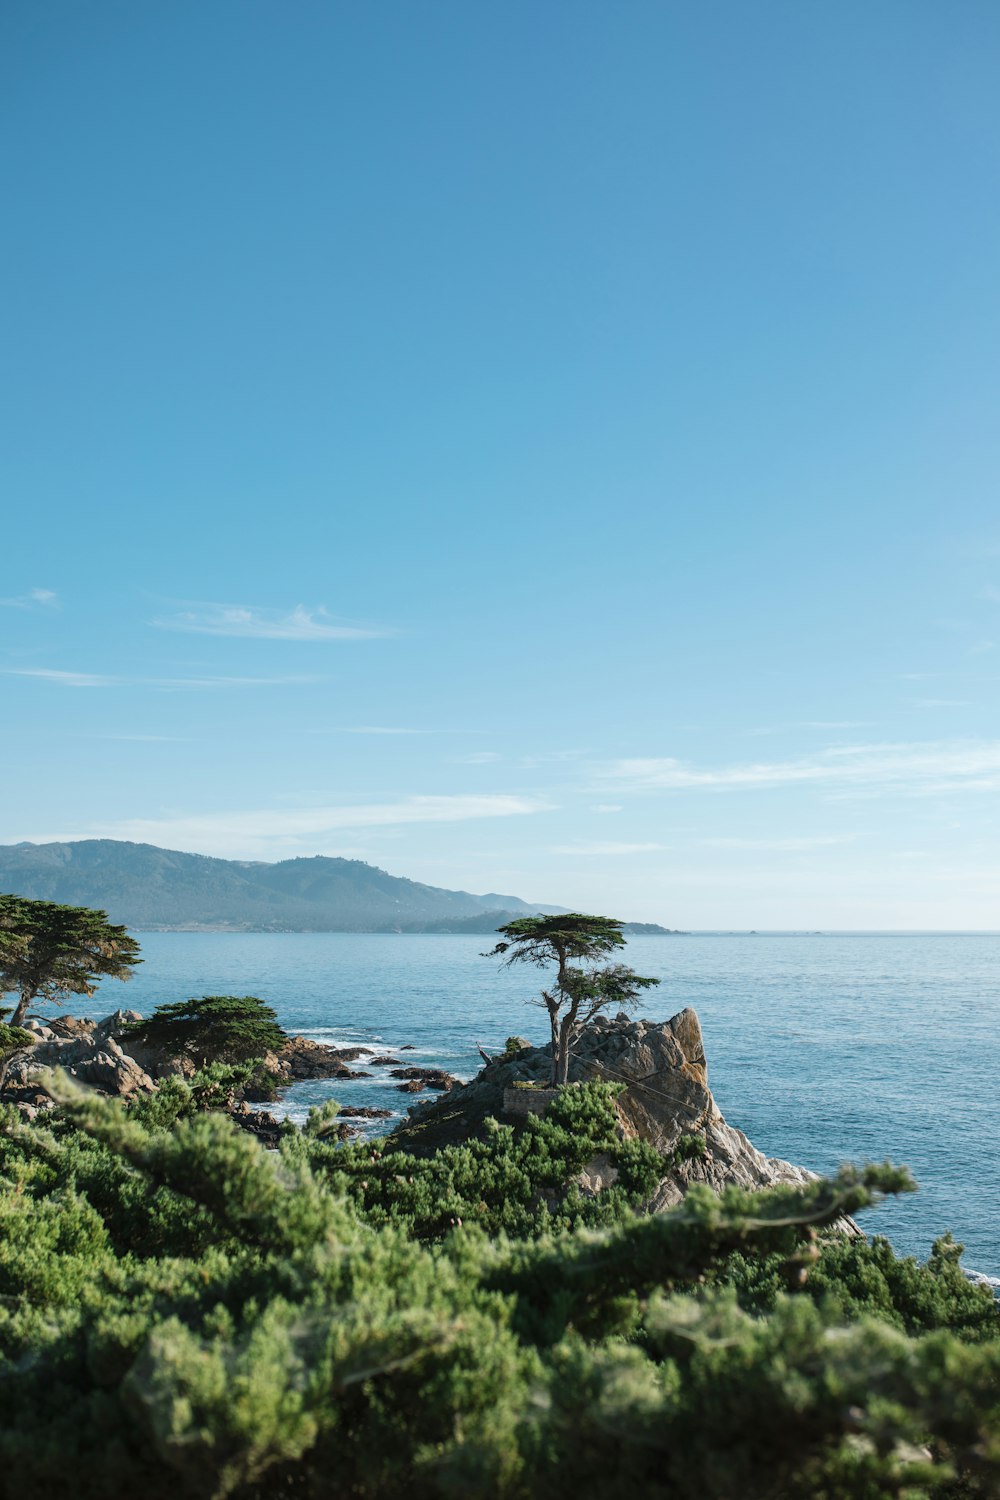 a lone tree on a rocky cliff overlooking the ocean